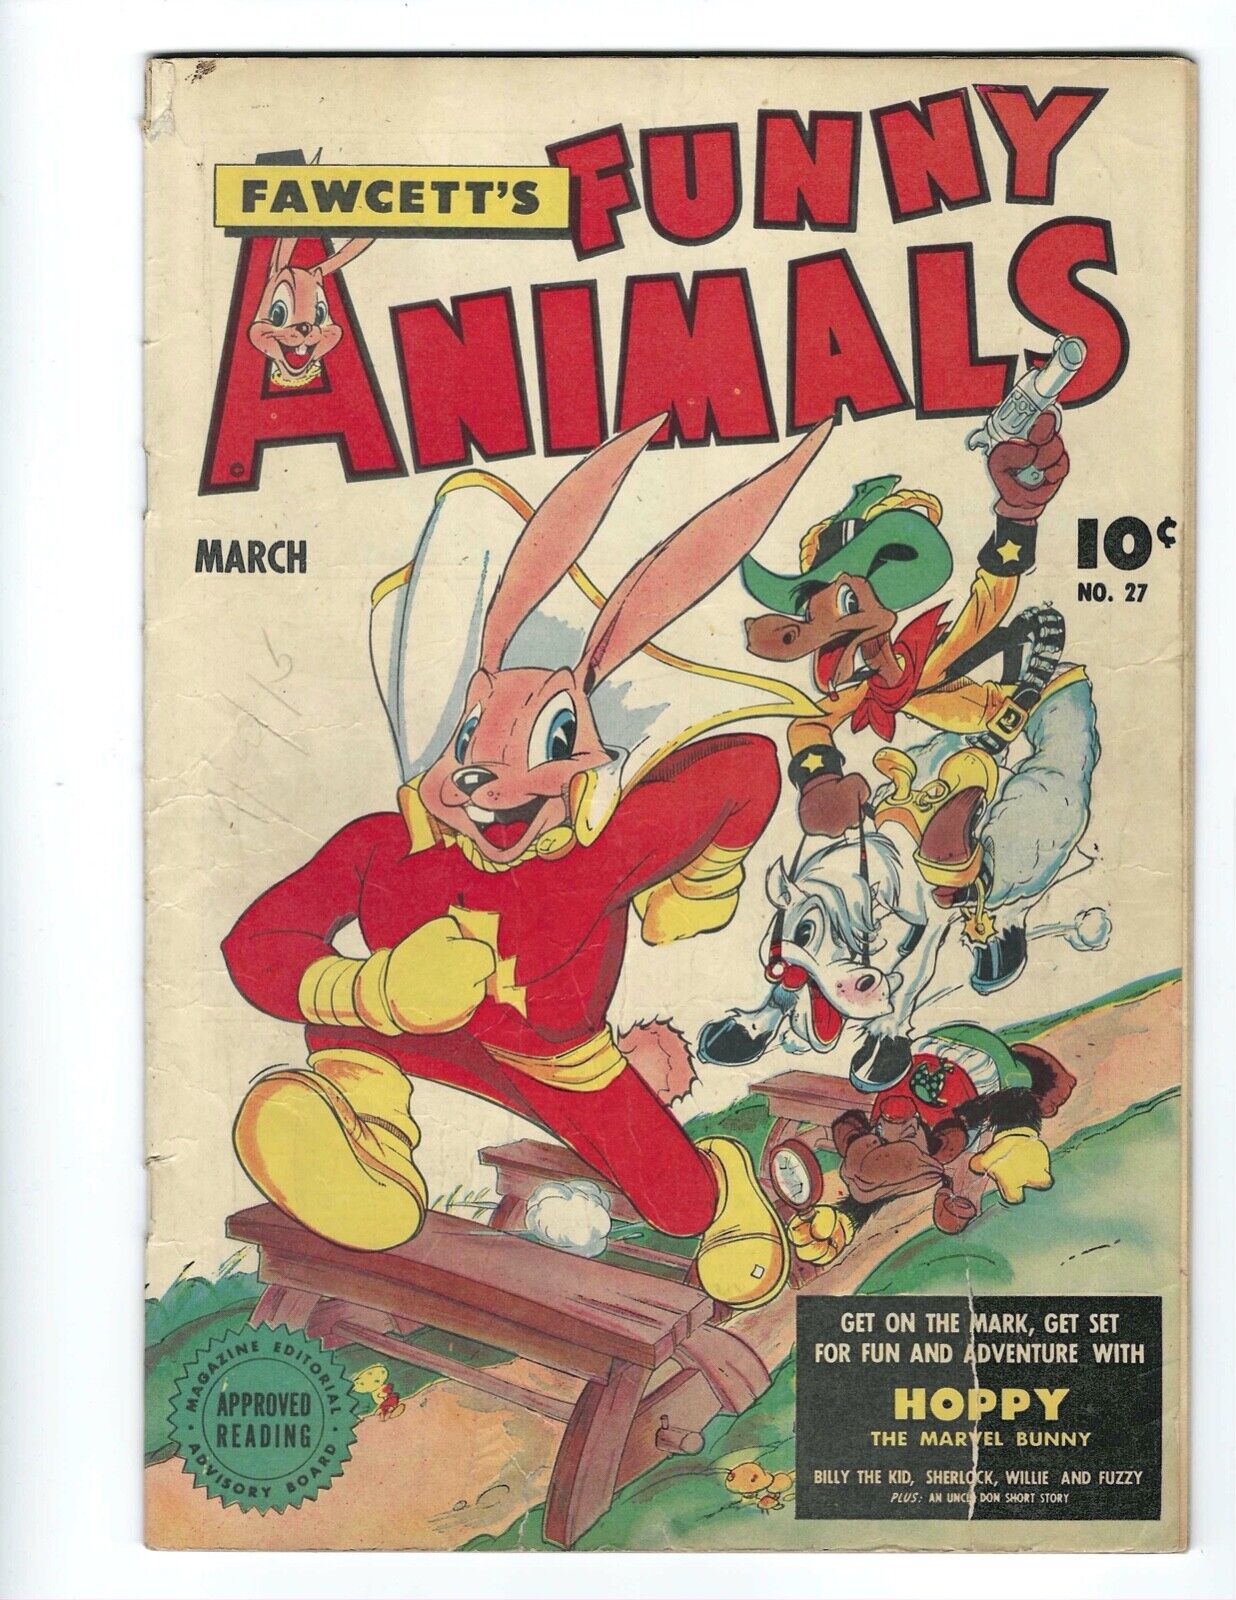 Fawcett's Funny Animals #27 March 1945 VG+ or better  Combine Shipping